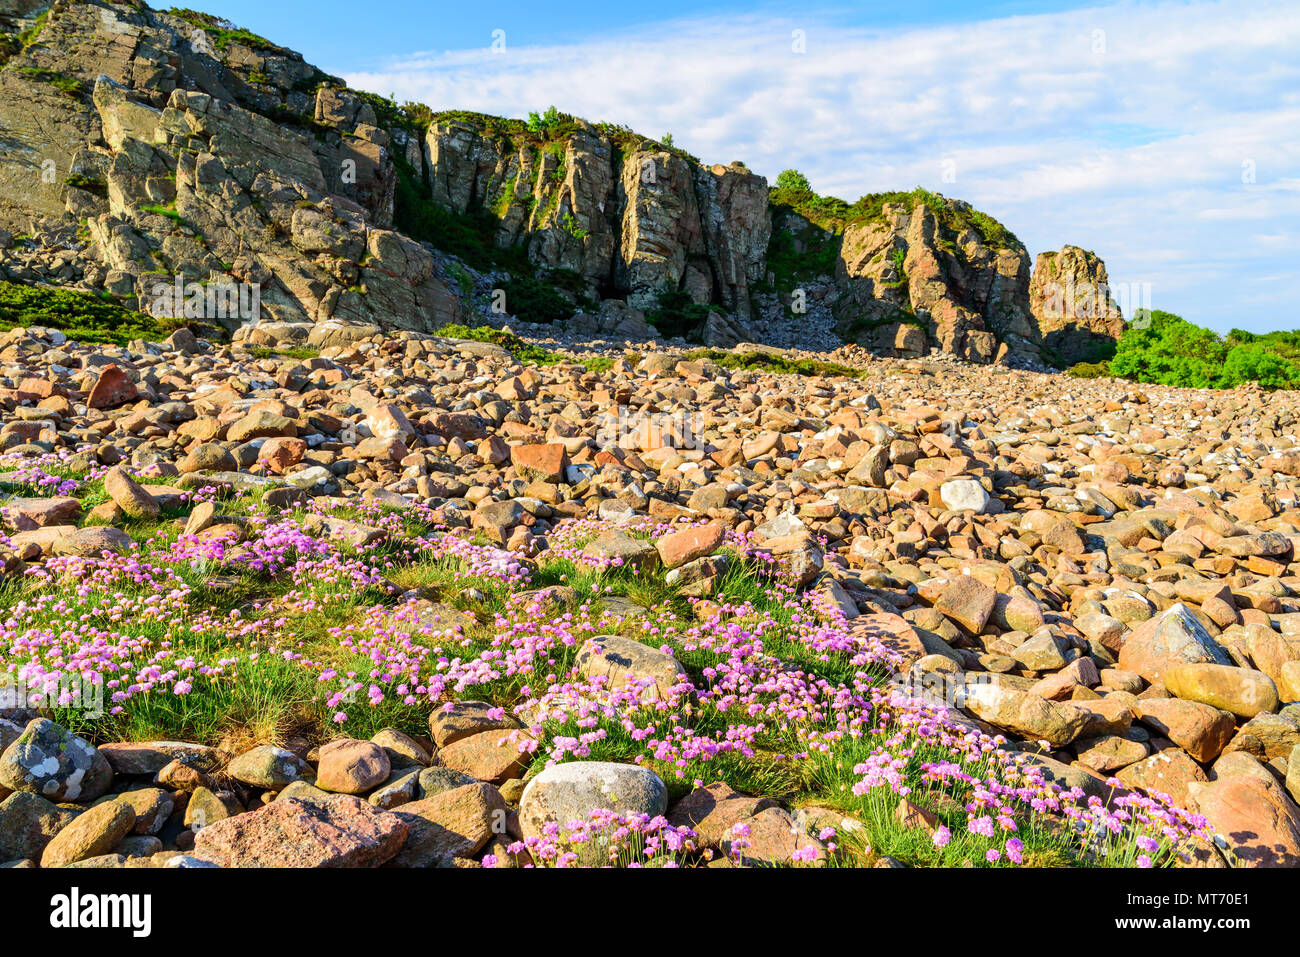 Thrift (Armeria maritima) growing in the rocky landscape at Hovs hallar in the Bjare nature reserve in Sweden. Stock Photo